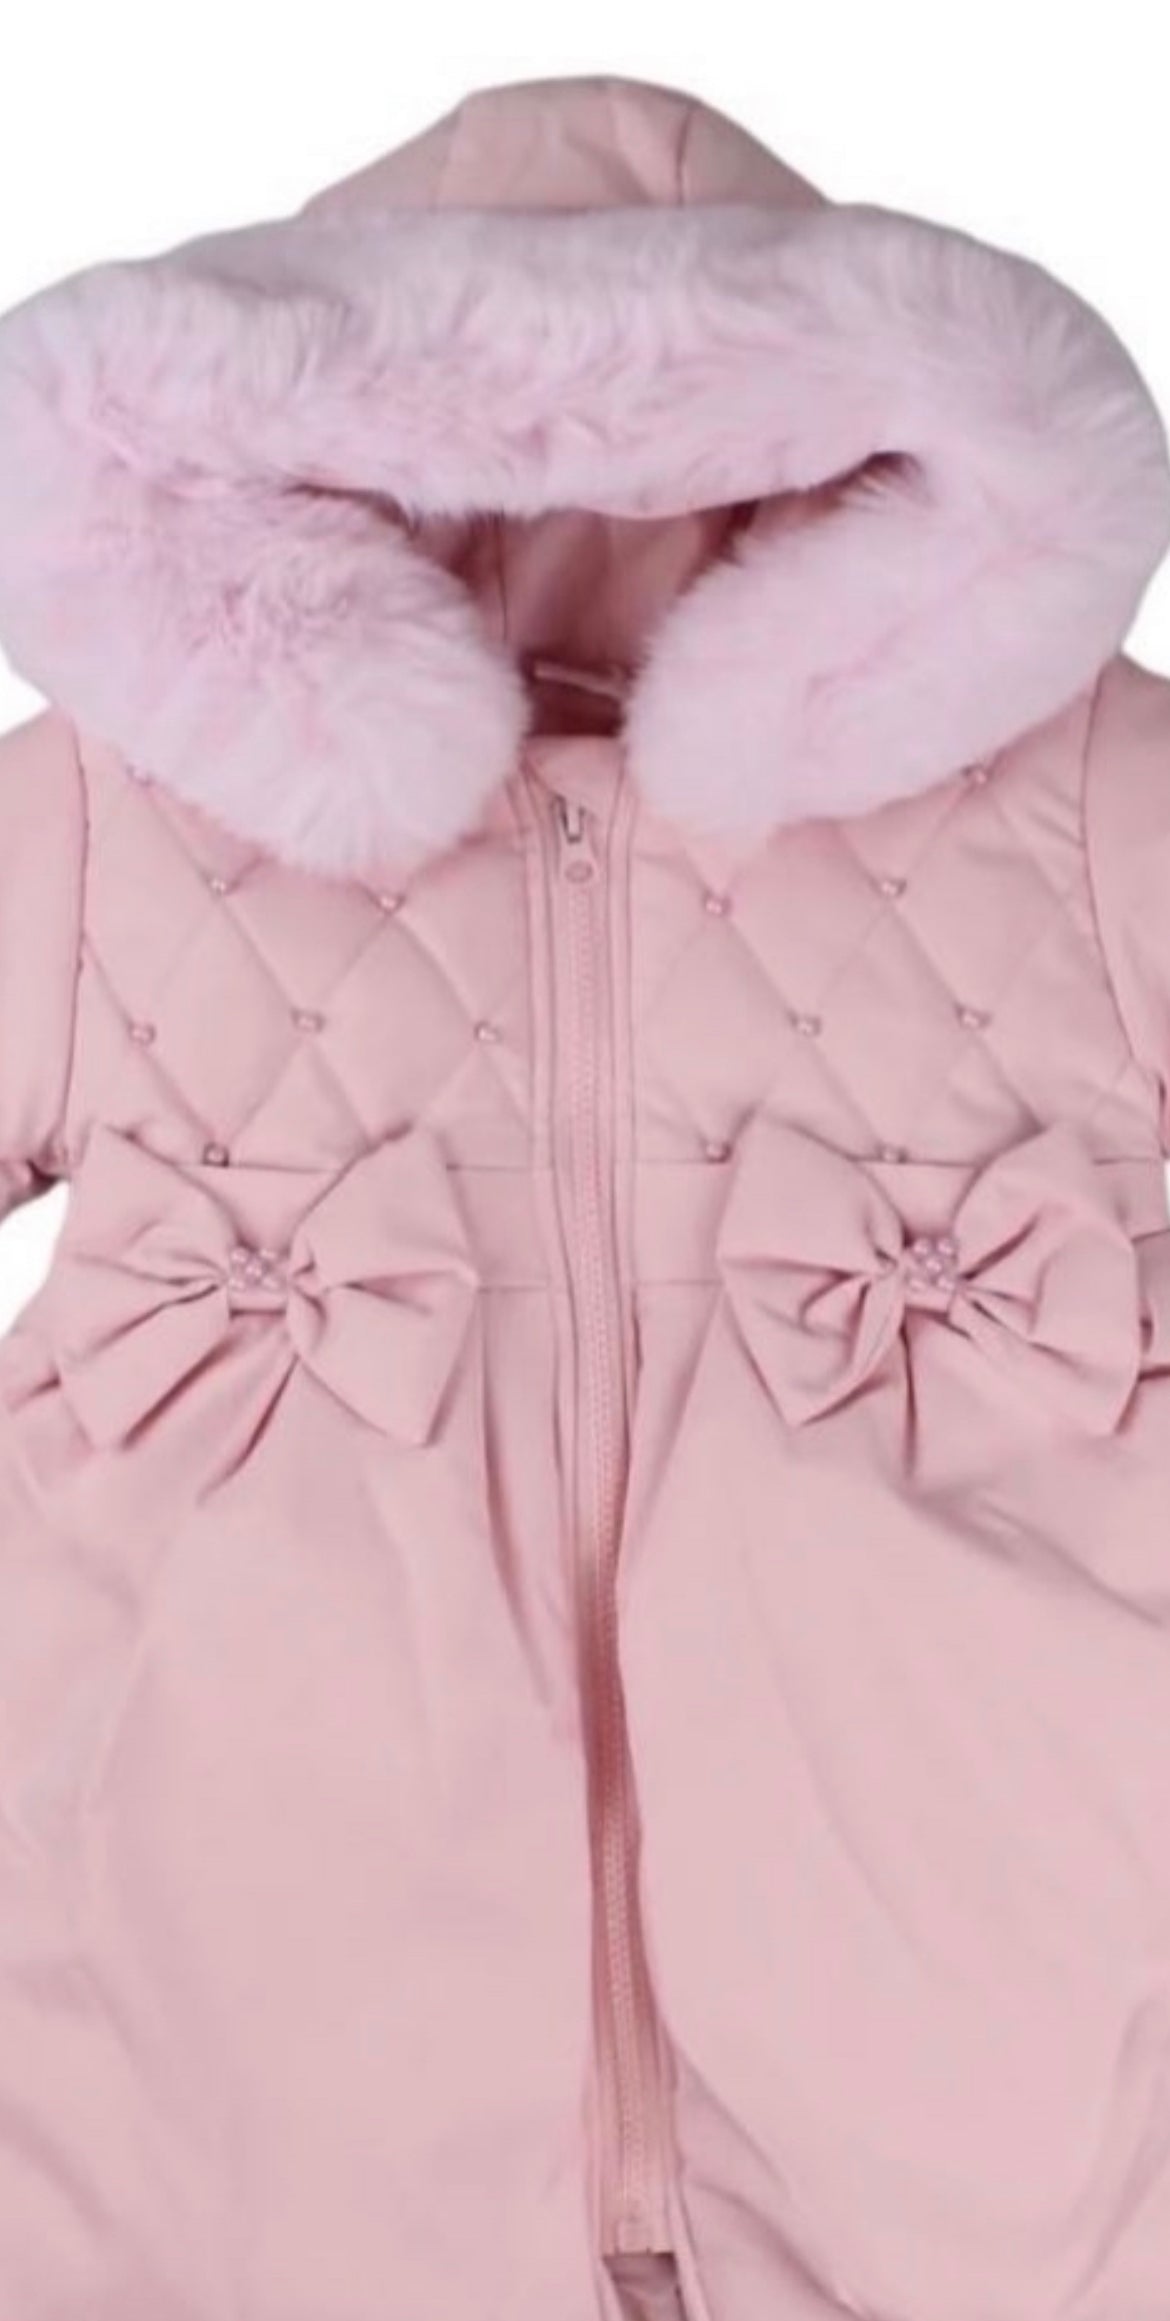 Wee Me Girls Pink Padded Coat With Faux Fur Hood